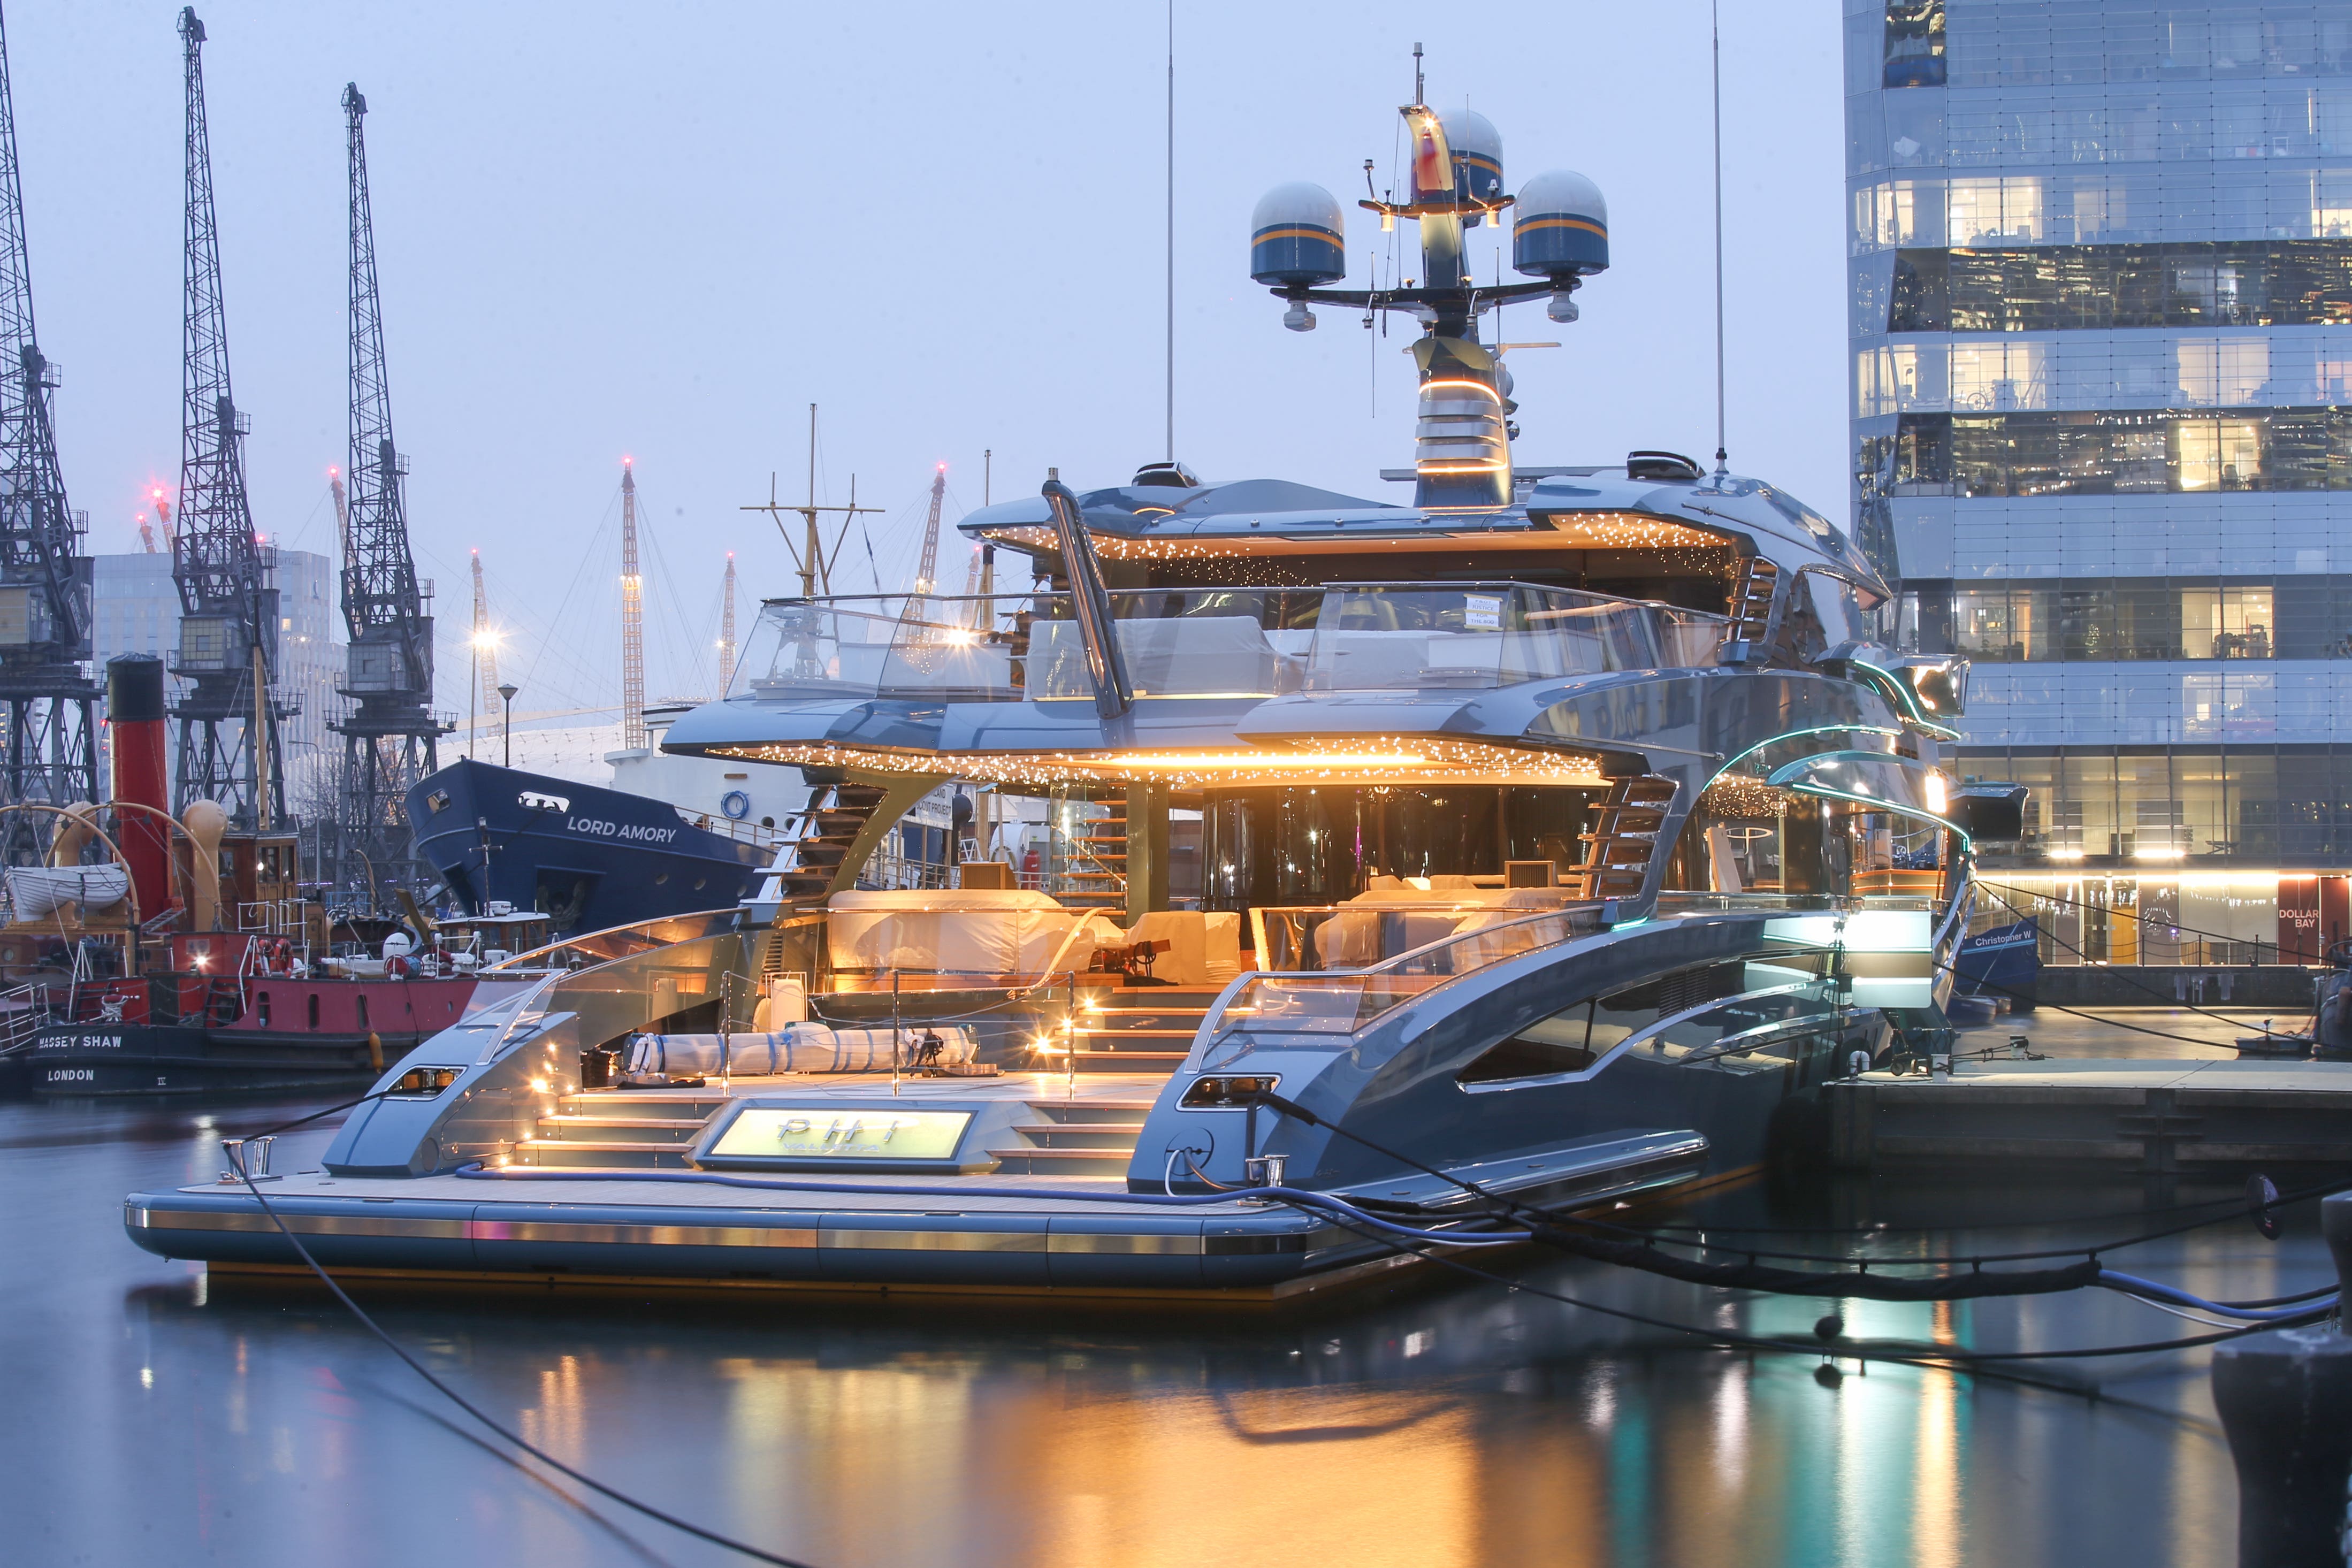 Superyacht the Phi in Canary Wharf, east London, detained as part of sanctions against Russia (James Manning/PA)